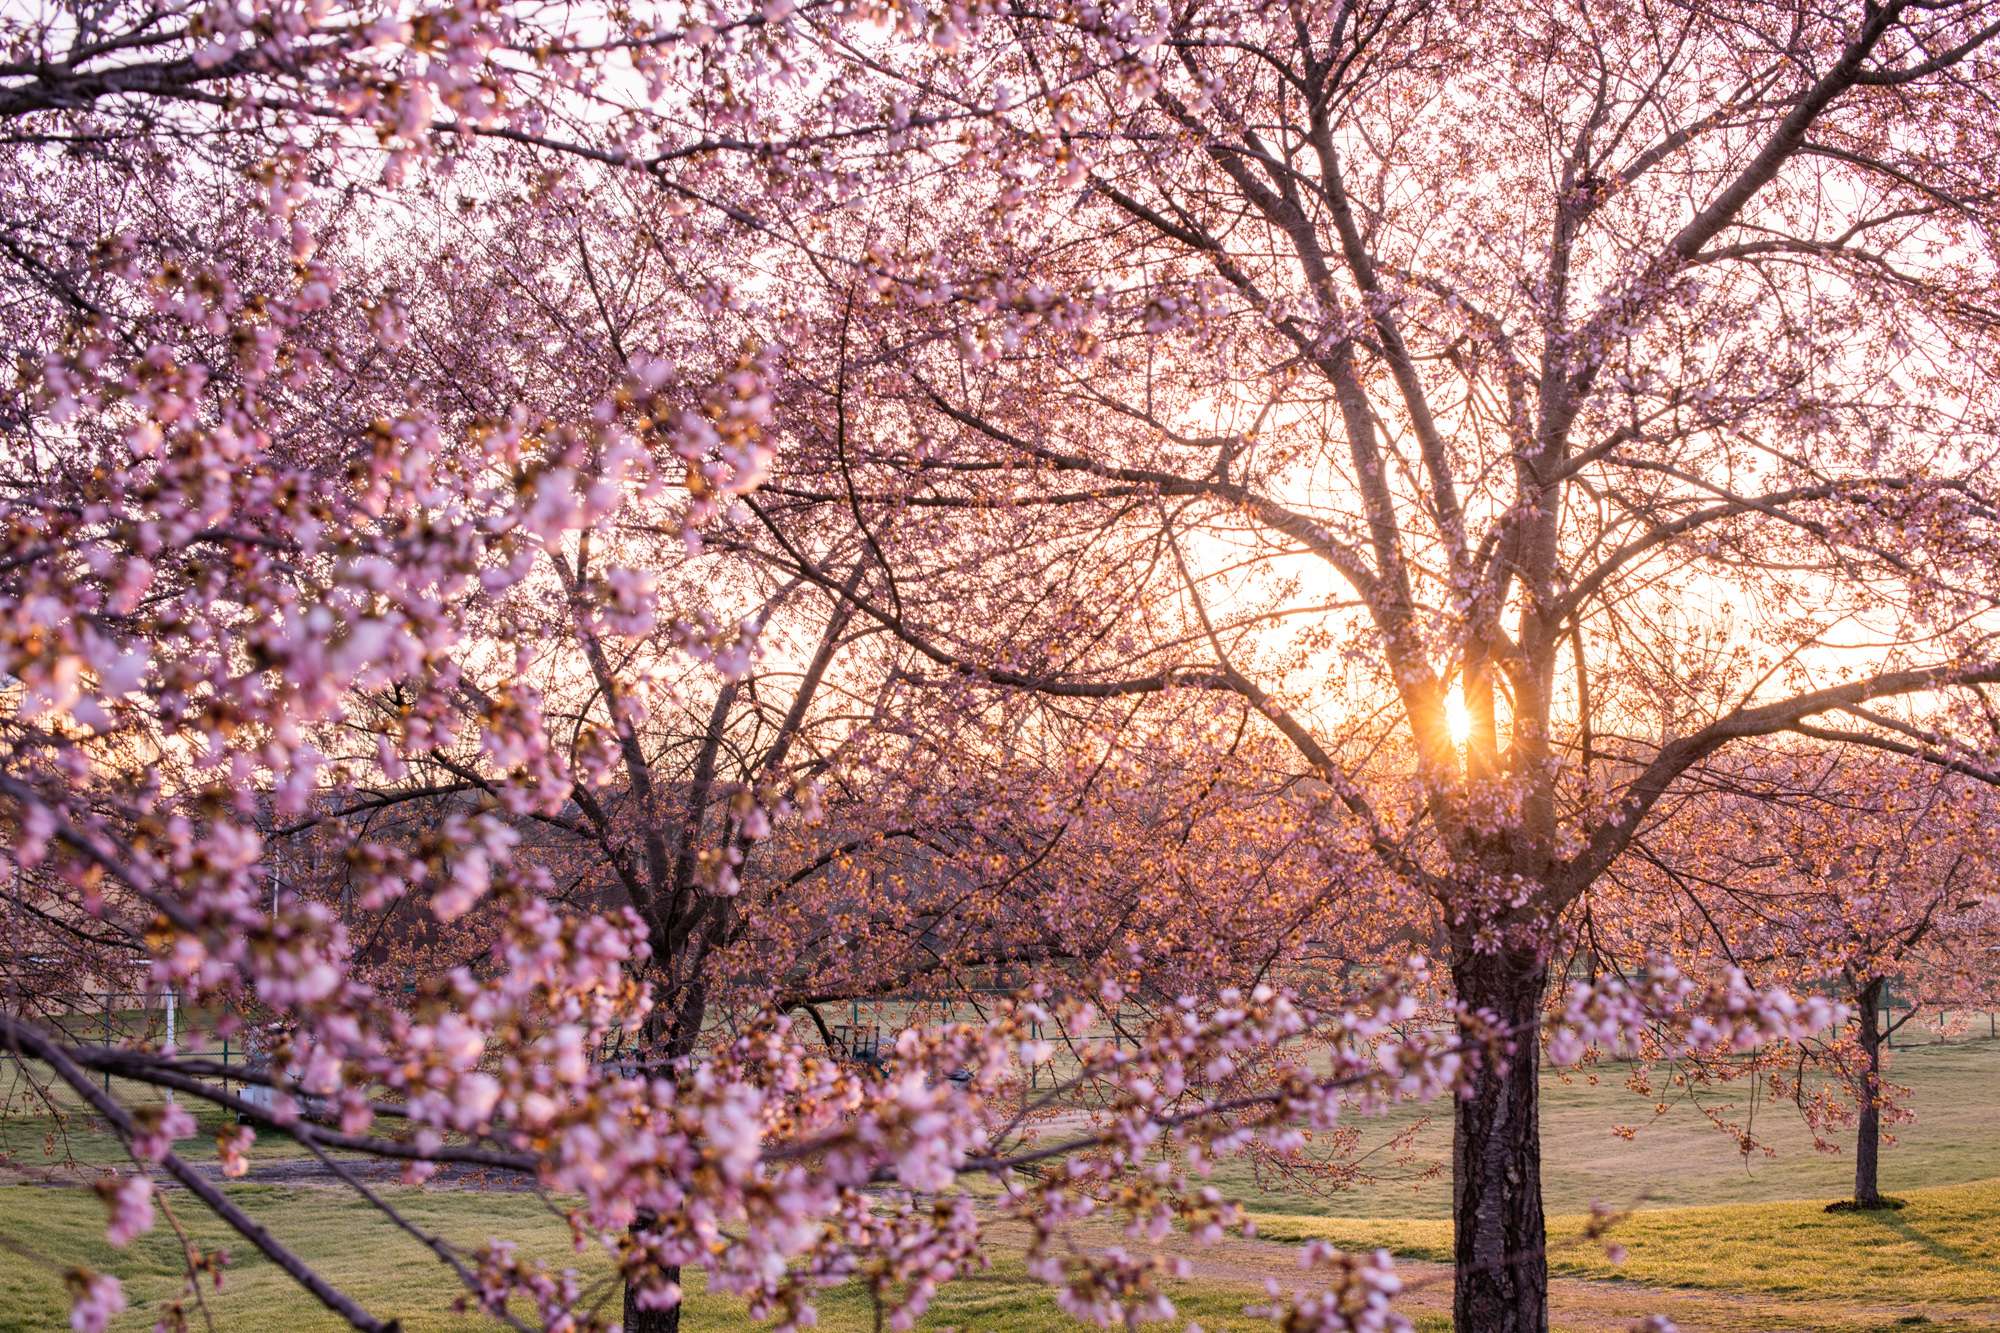 The sunrise as viewed through blooming Cherry Blossom trees